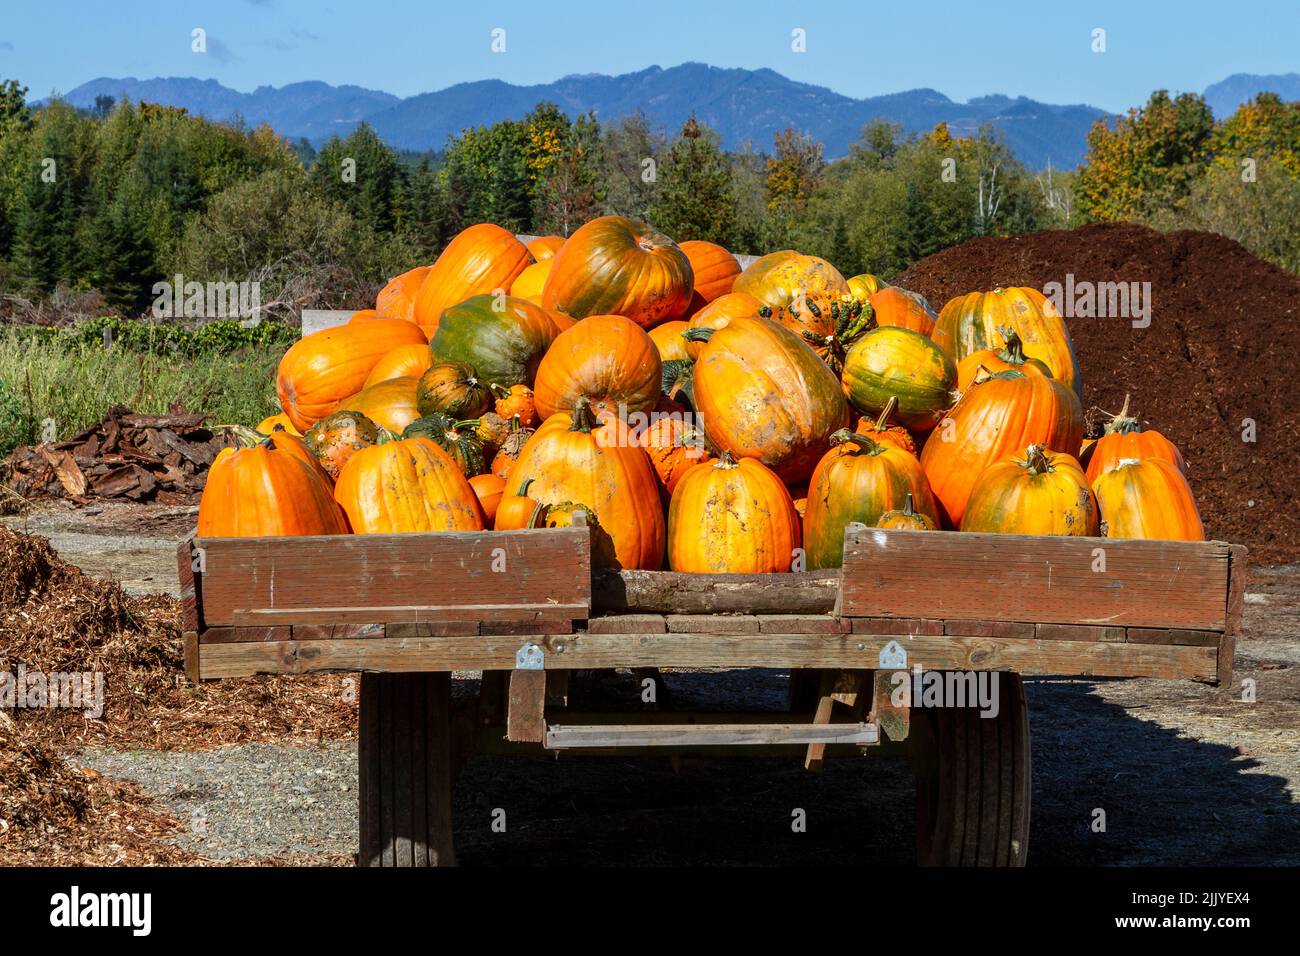 A truckload of just picked pumpkins harvested on a local farm in western Washington State, USA, on a sunny October day. Stock Photo